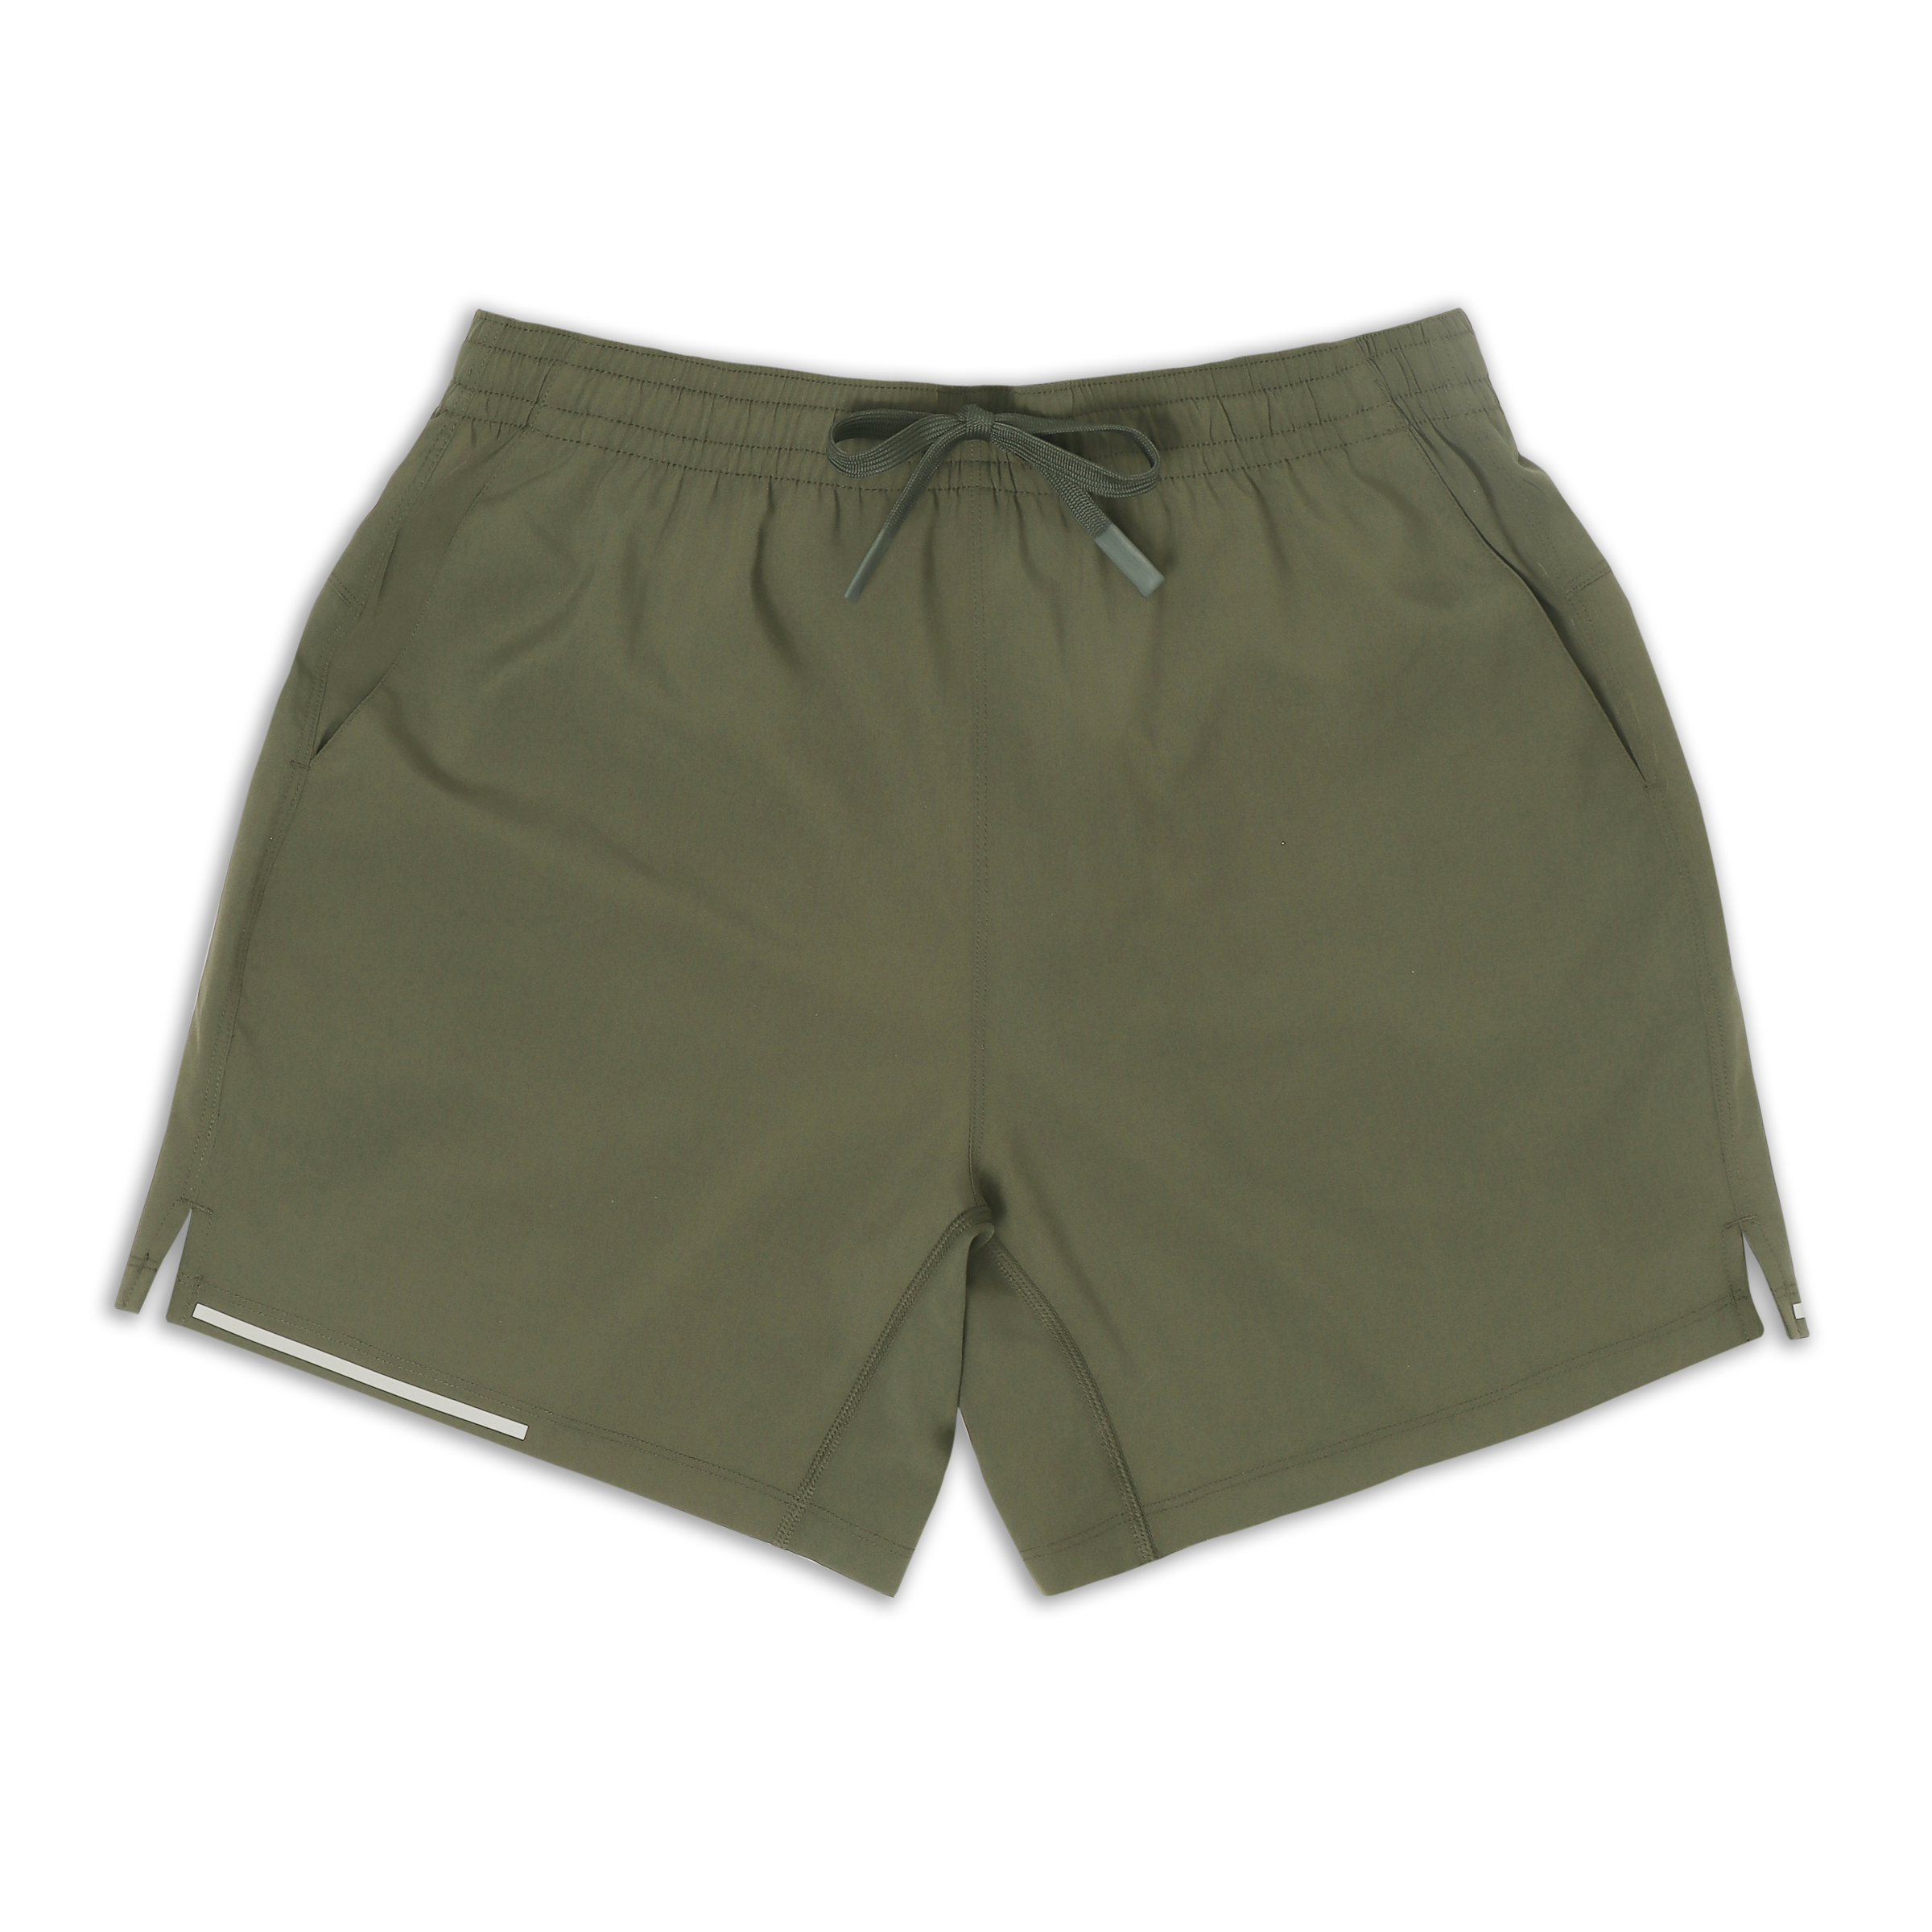 Run Short 5.5" Military Green front with elastic waistband, dyed-to-match drawstring with rubberized tips, two front pockets, split hem, and reflective line on bottom right hem